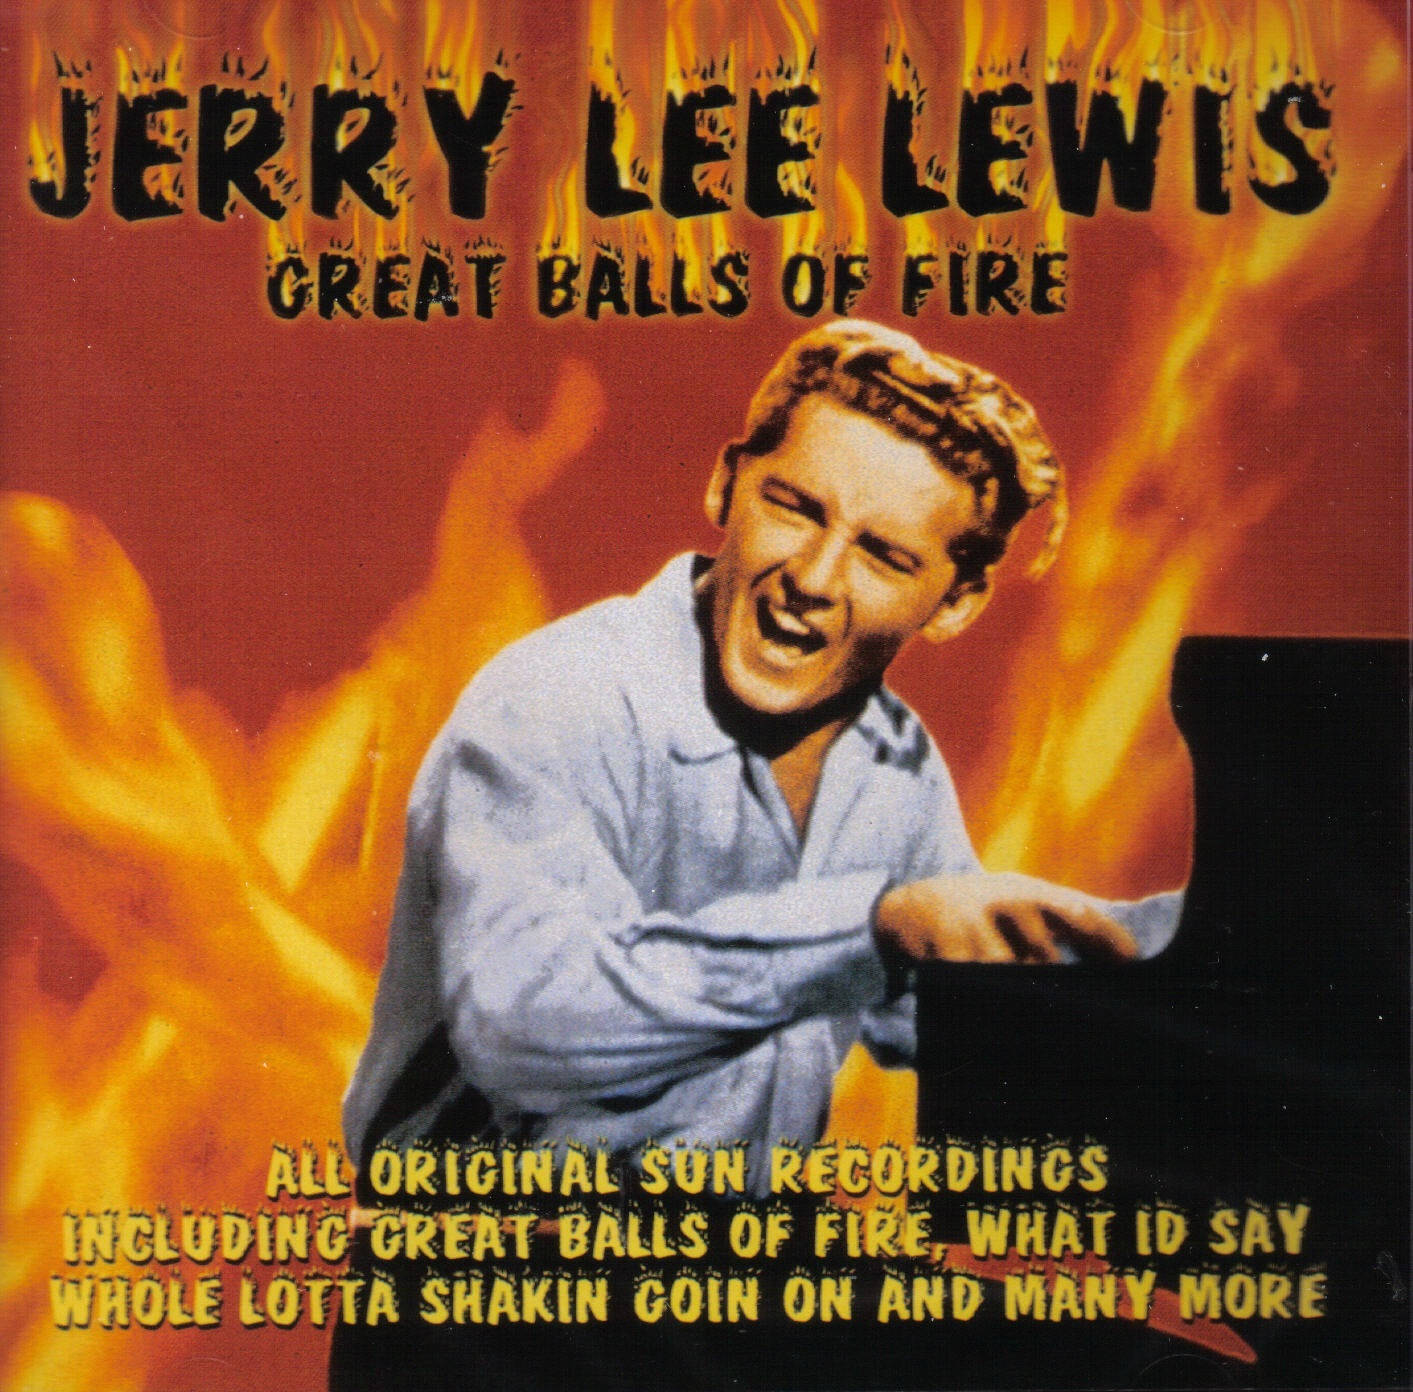 Fiery Jerry Lee Lewis Album Cover Wallpaper